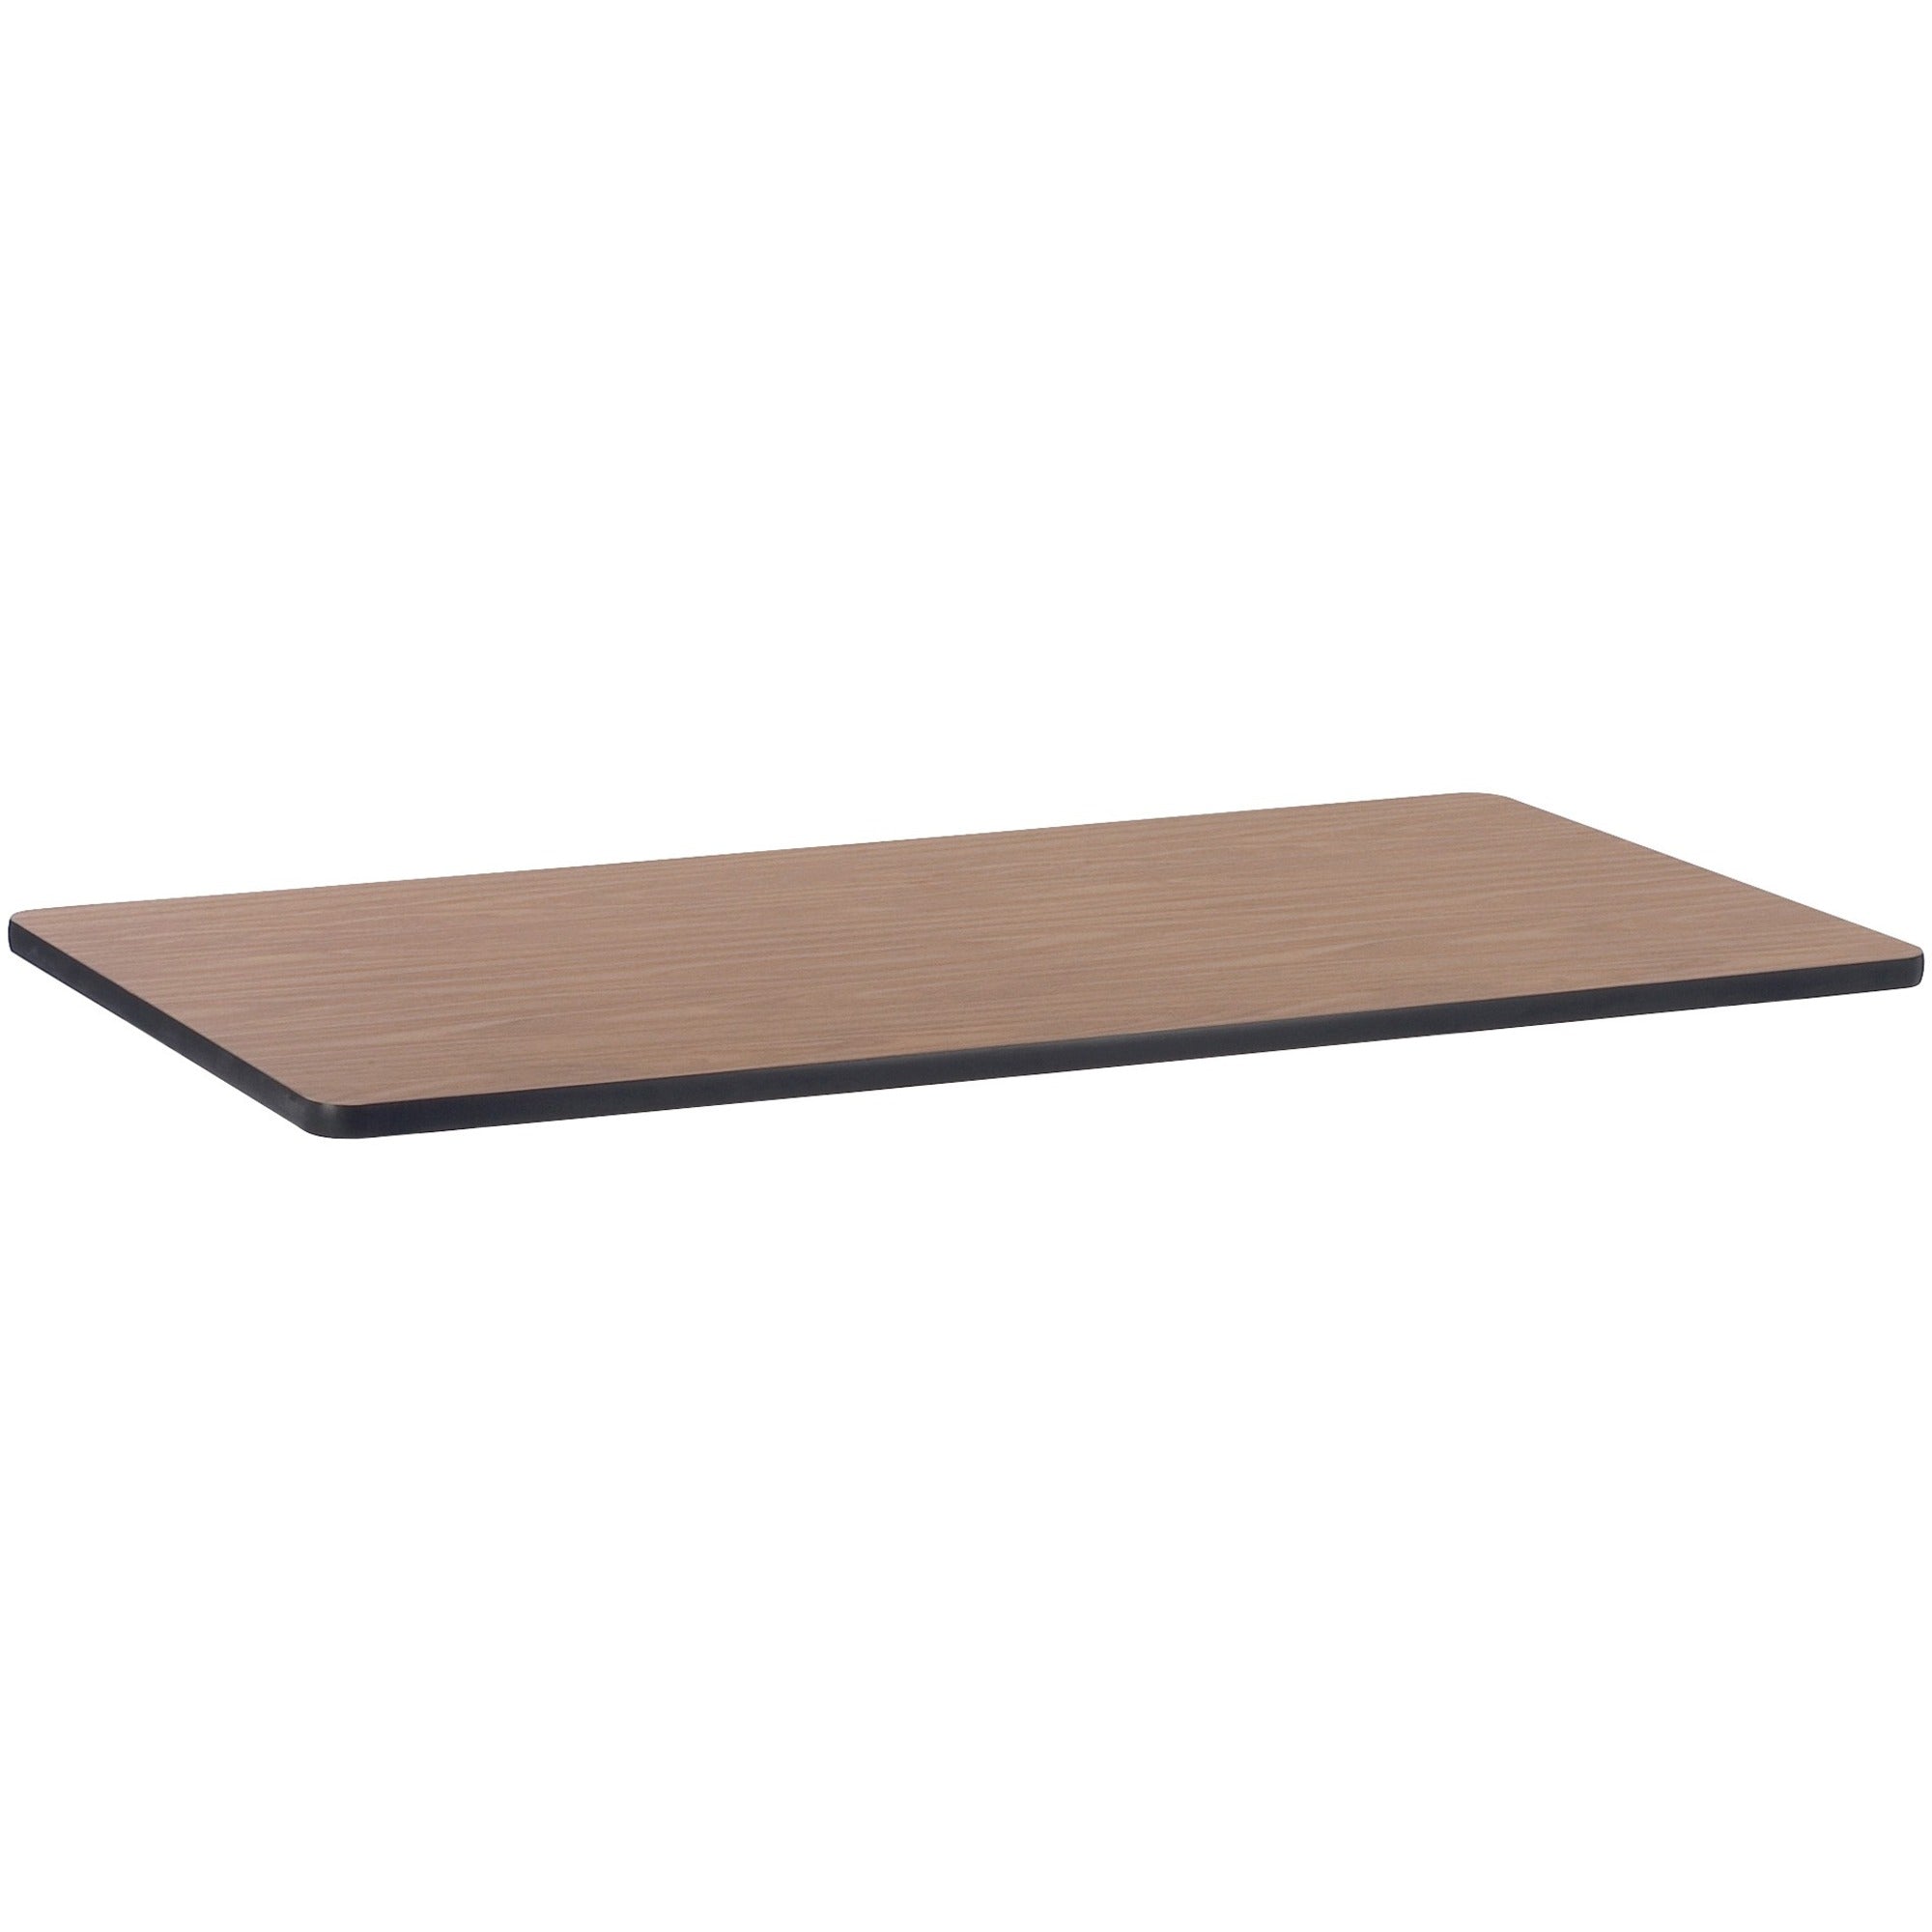 lorell-classroom-activity-tabletop-for-table-tophigh-pressure-laminate-hpl-rectangle-medium-oak-top-x-30-table-top-width-x-60-table-top-depth-x-113-table-top-thickness-assembly-required-1-each_llr99895 - 1